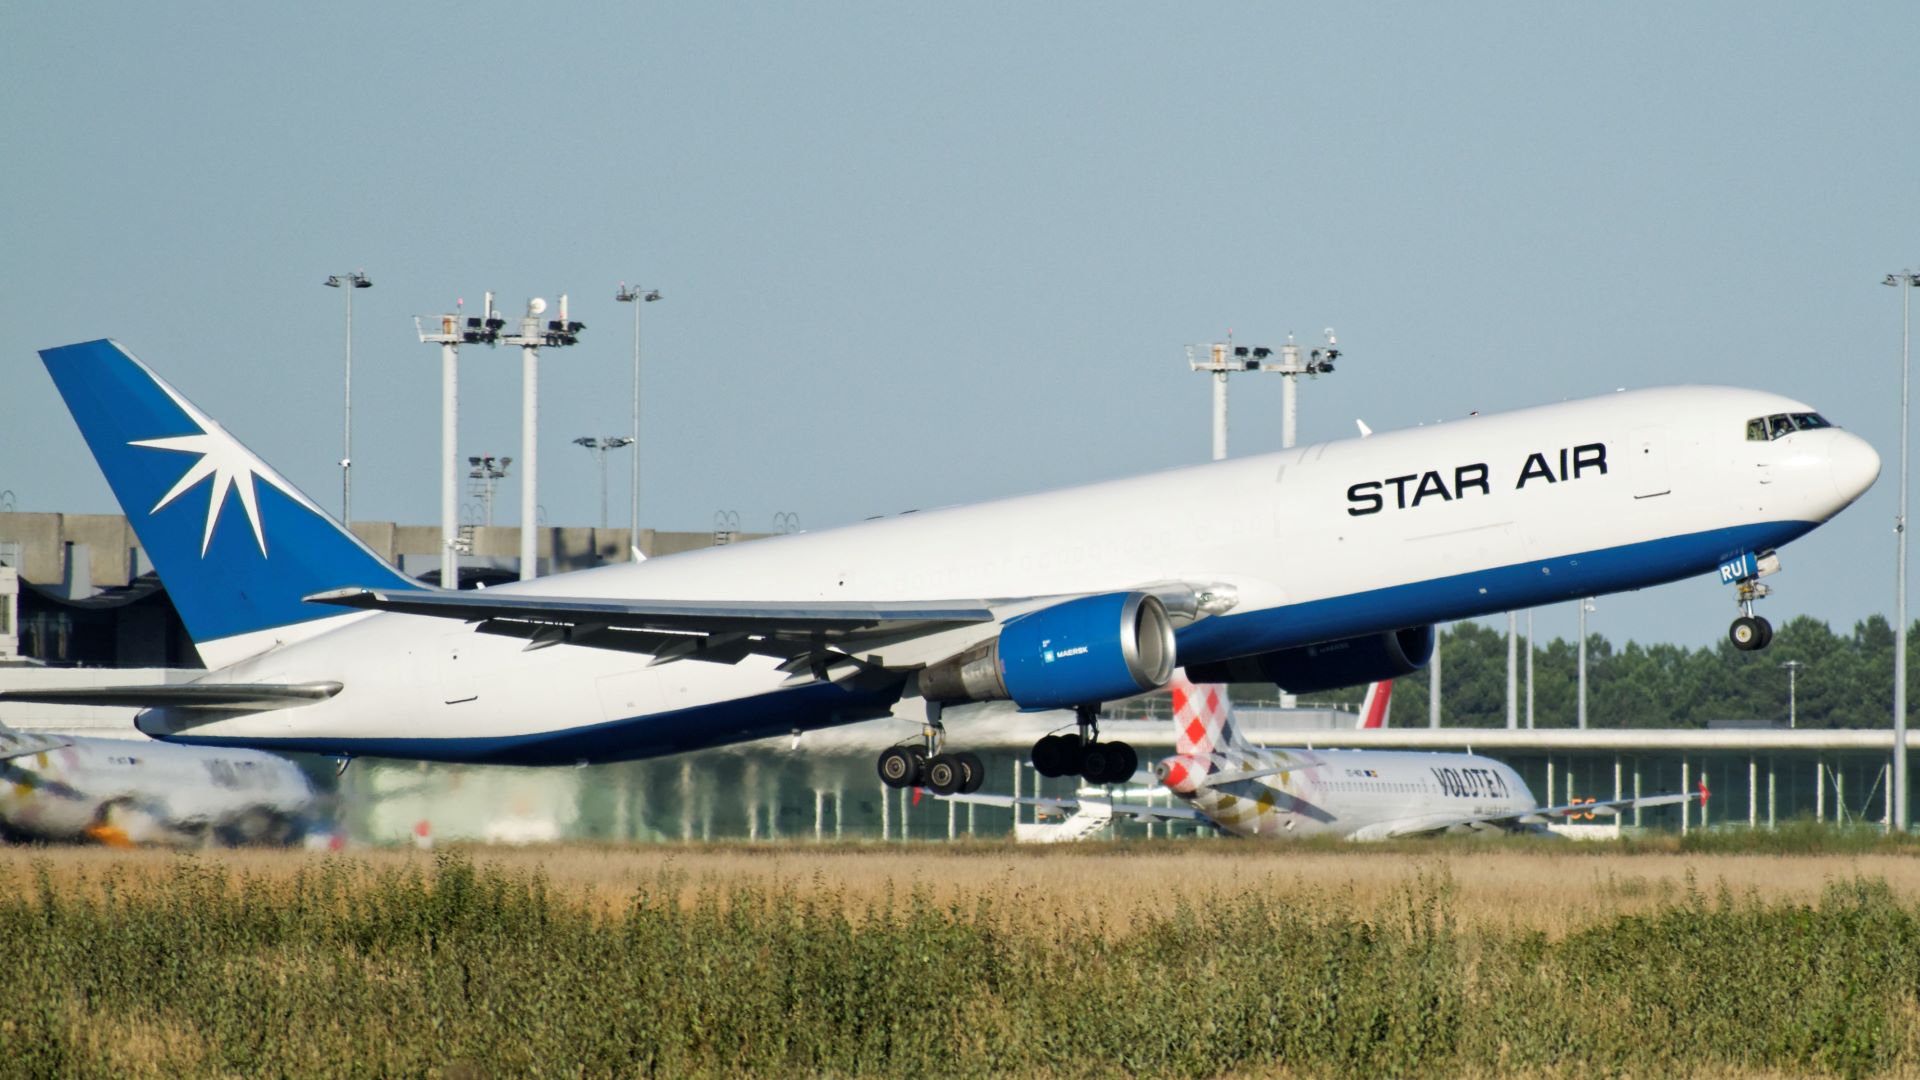 A Star Air jet, white with blue tail, lifts off the runway. Star Air is now fully integrated into Maersk's logistics operation.